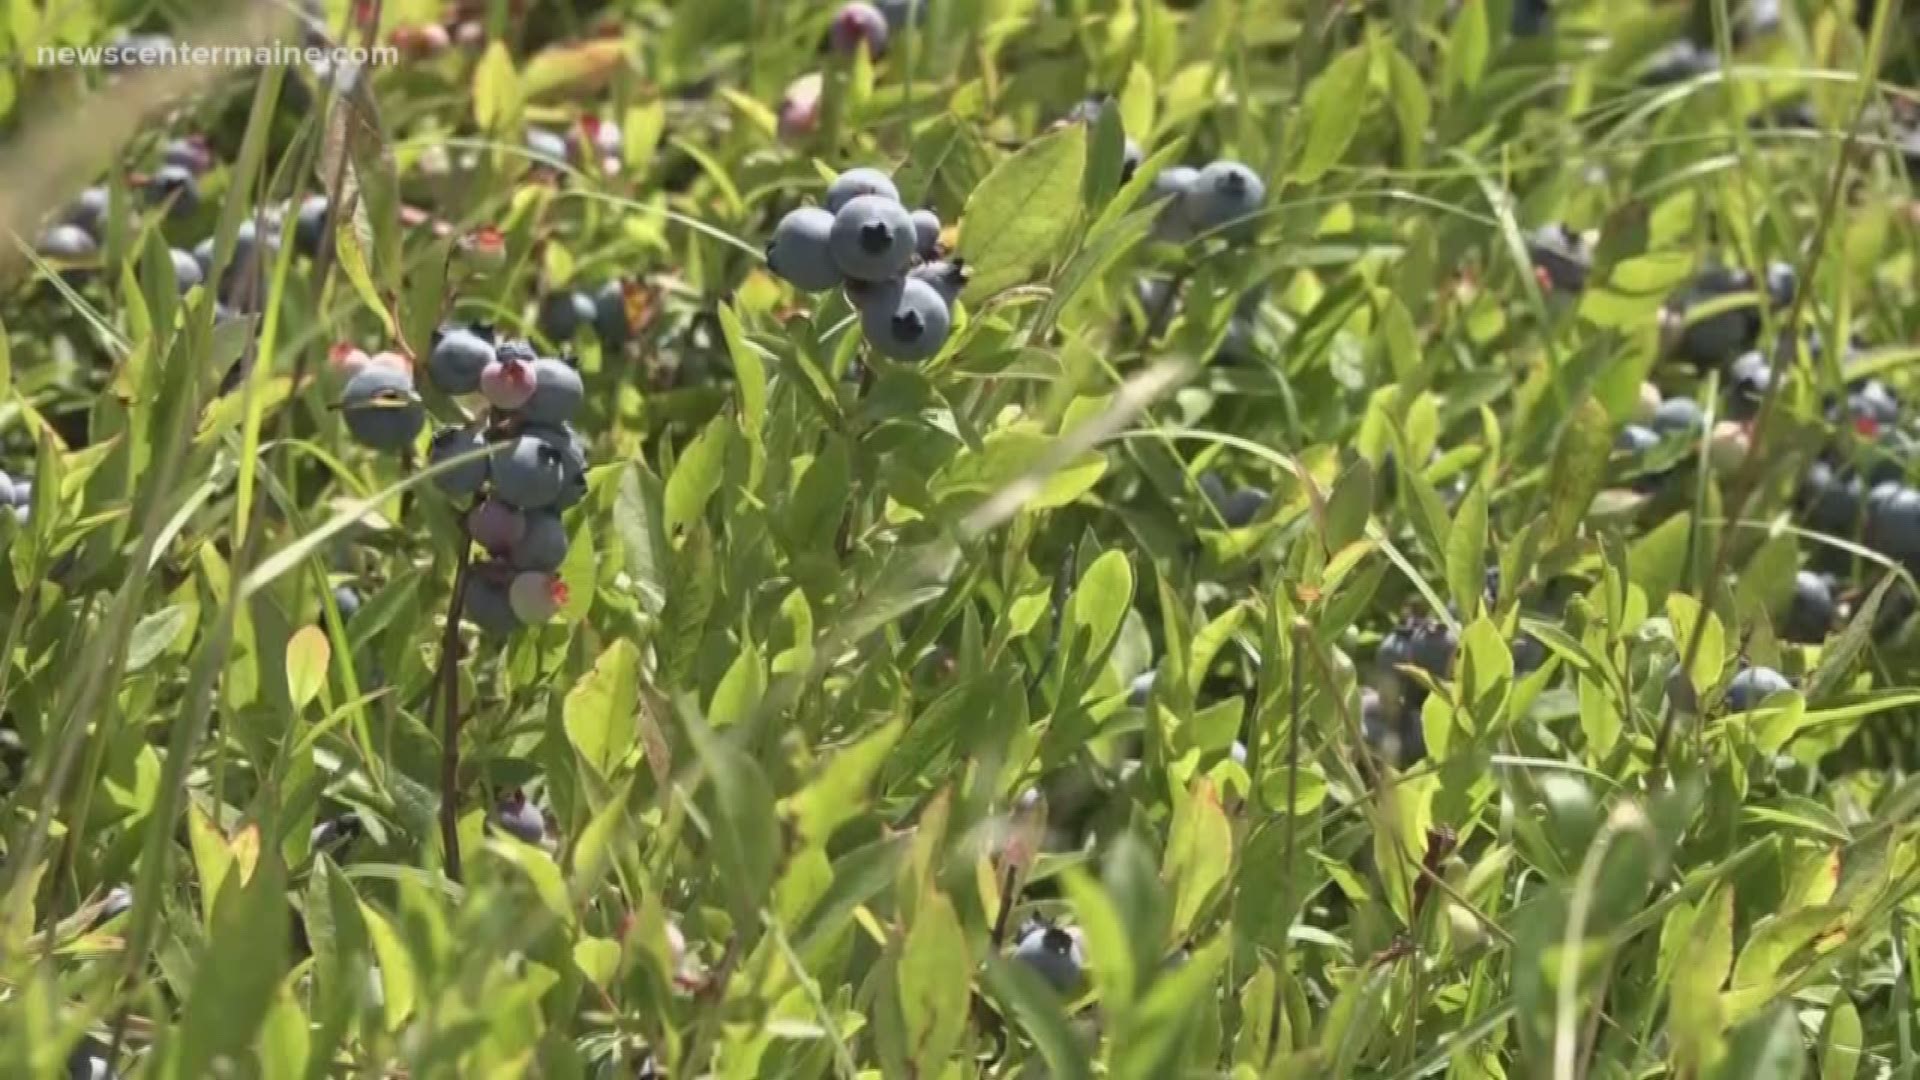 Maine's Congressional delegates ask the United States Department of Agriculture to include wild blueberry producers in a program that provides aid to groups affected by the trade war with China